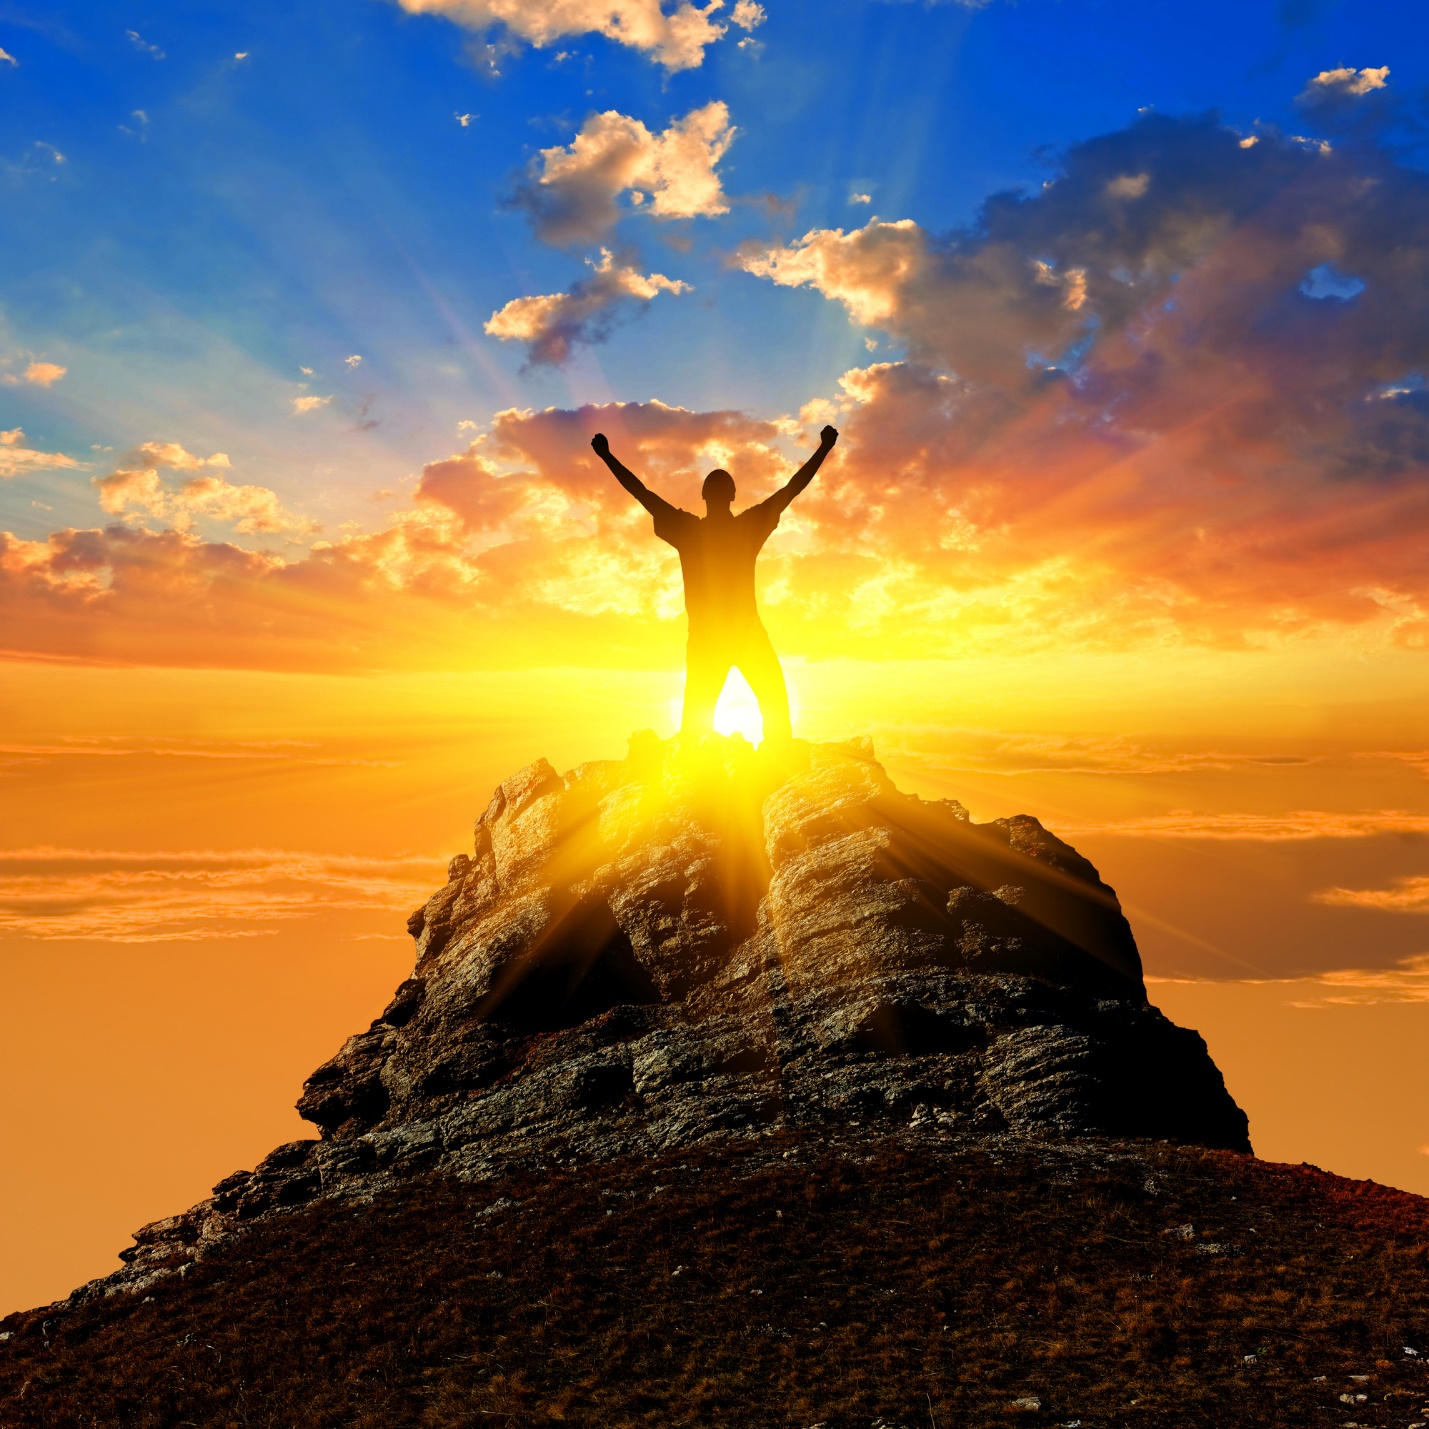 A person standing on a rock with the sun behind them

Description automatically generated with low confidence